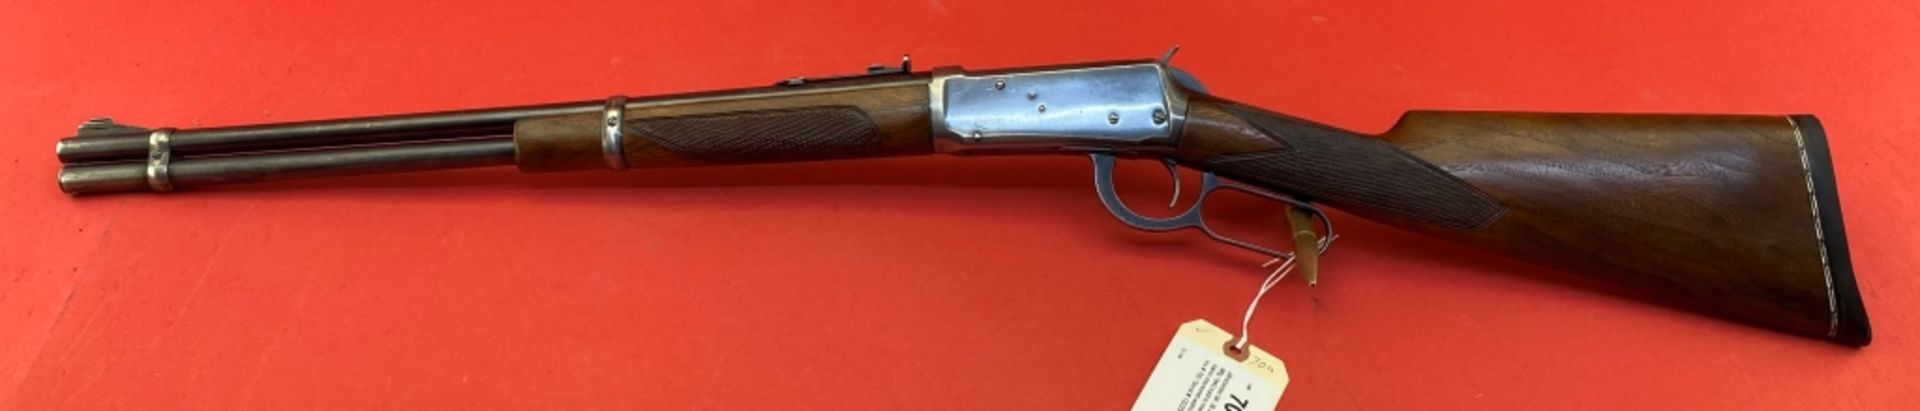 Winchester 94 .30 WCF Rifle - Image 16 of 16